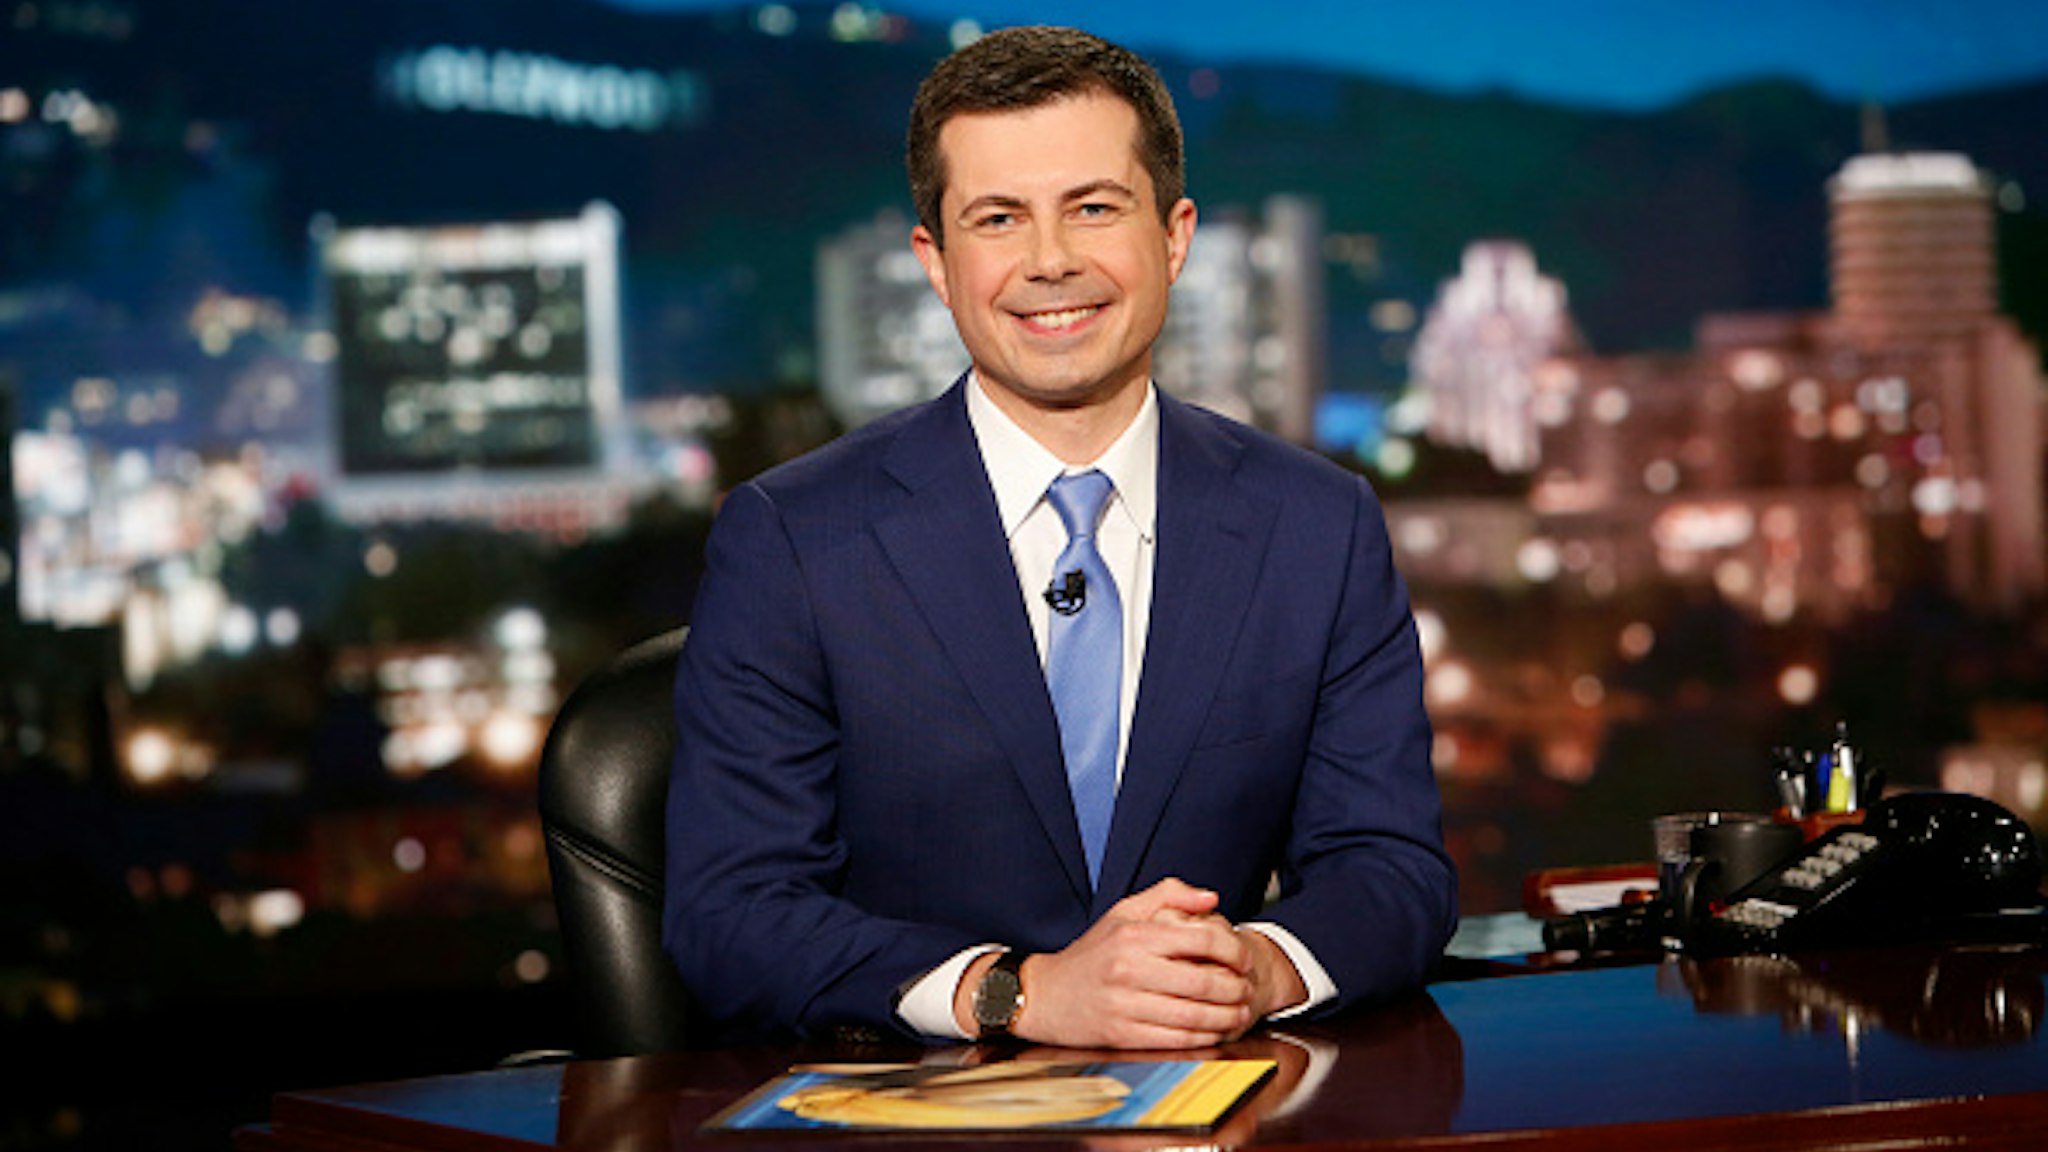 JIMMY KIMMEL LIVE! - "Jimmy Kimmel Live!" airs every weeknight at 11:35 p.m. EST and features a diverse lineup of guests that include celebrities, athletes, musical acts, comedians and human interest subjects, along with comedy bits and a house band. Guest host Mayor Pete Buttigieg welcomes the guests for Thursday, March 12, included Sir Patrick Stewart (Star Trek: Picard), Tony Hale (Archibald's Next Big Thing) and musical guest Jhene Aiko featuring Miguel.